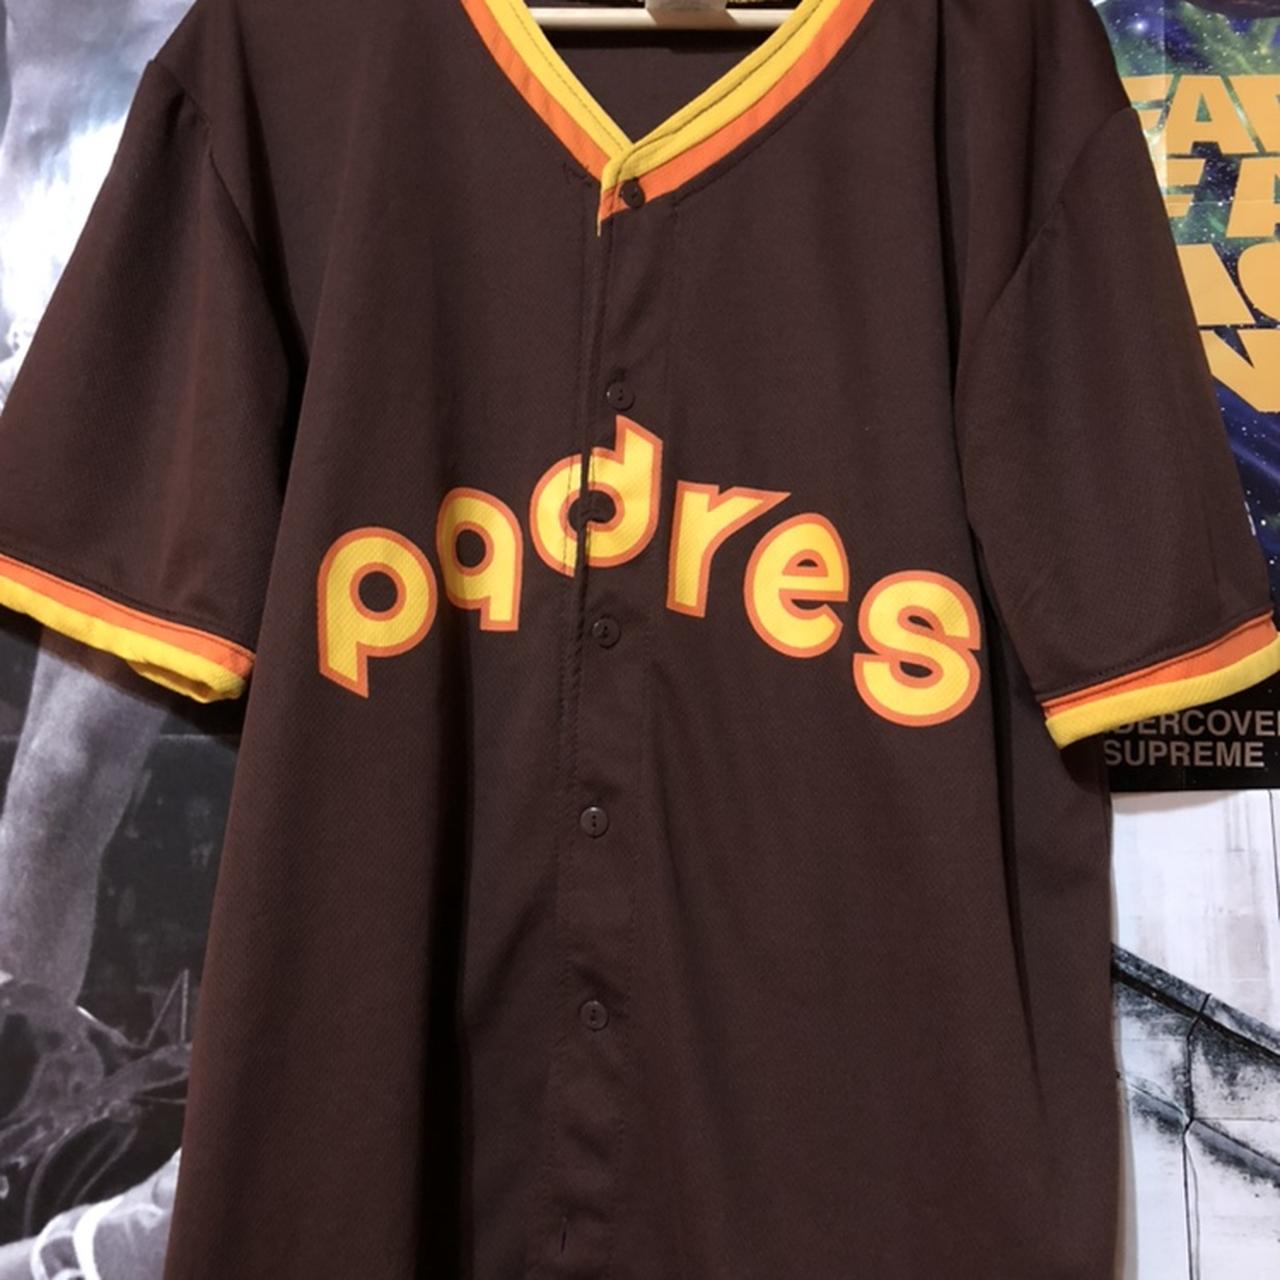 throwback san diego padres jersey